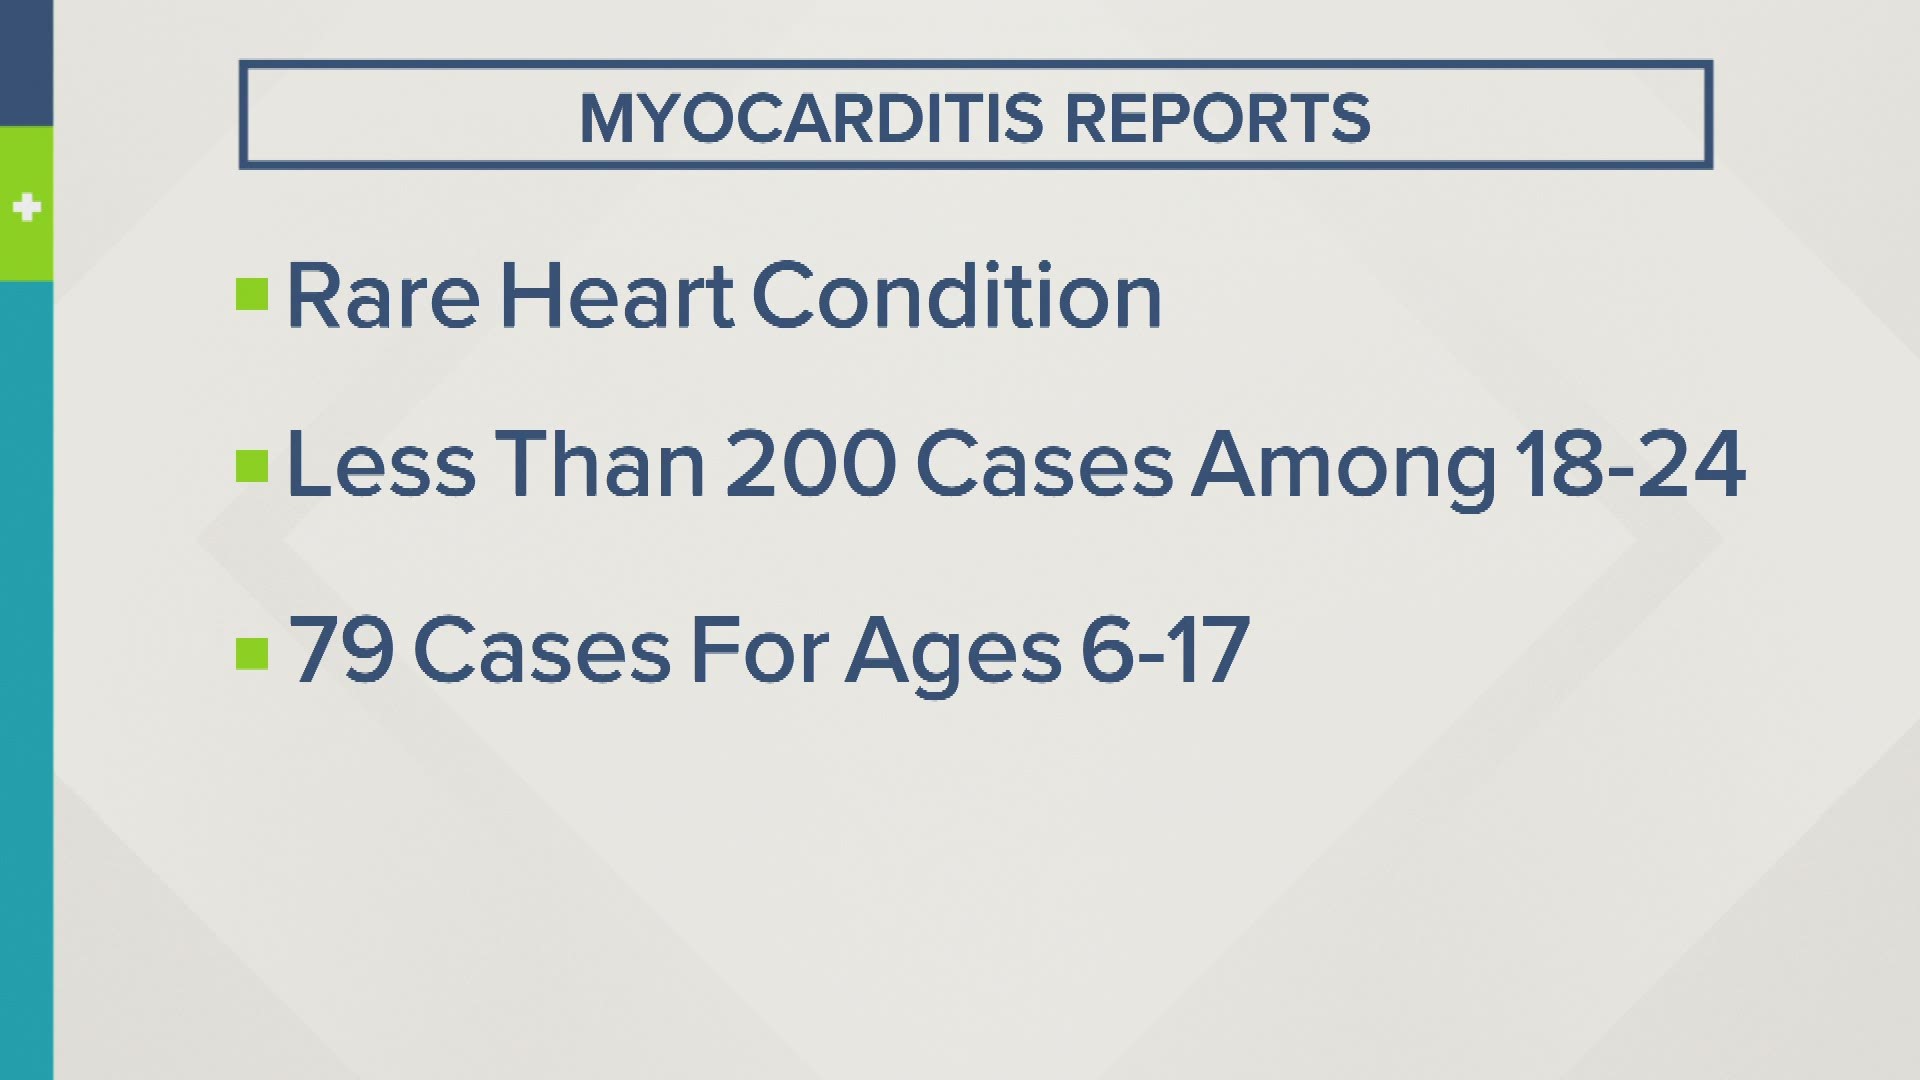 Dr. Ryan Serrano said myocarditis is so rare that he only knows of one patient who came through Riley Hospital for Children for treatment — and they're doing OK.